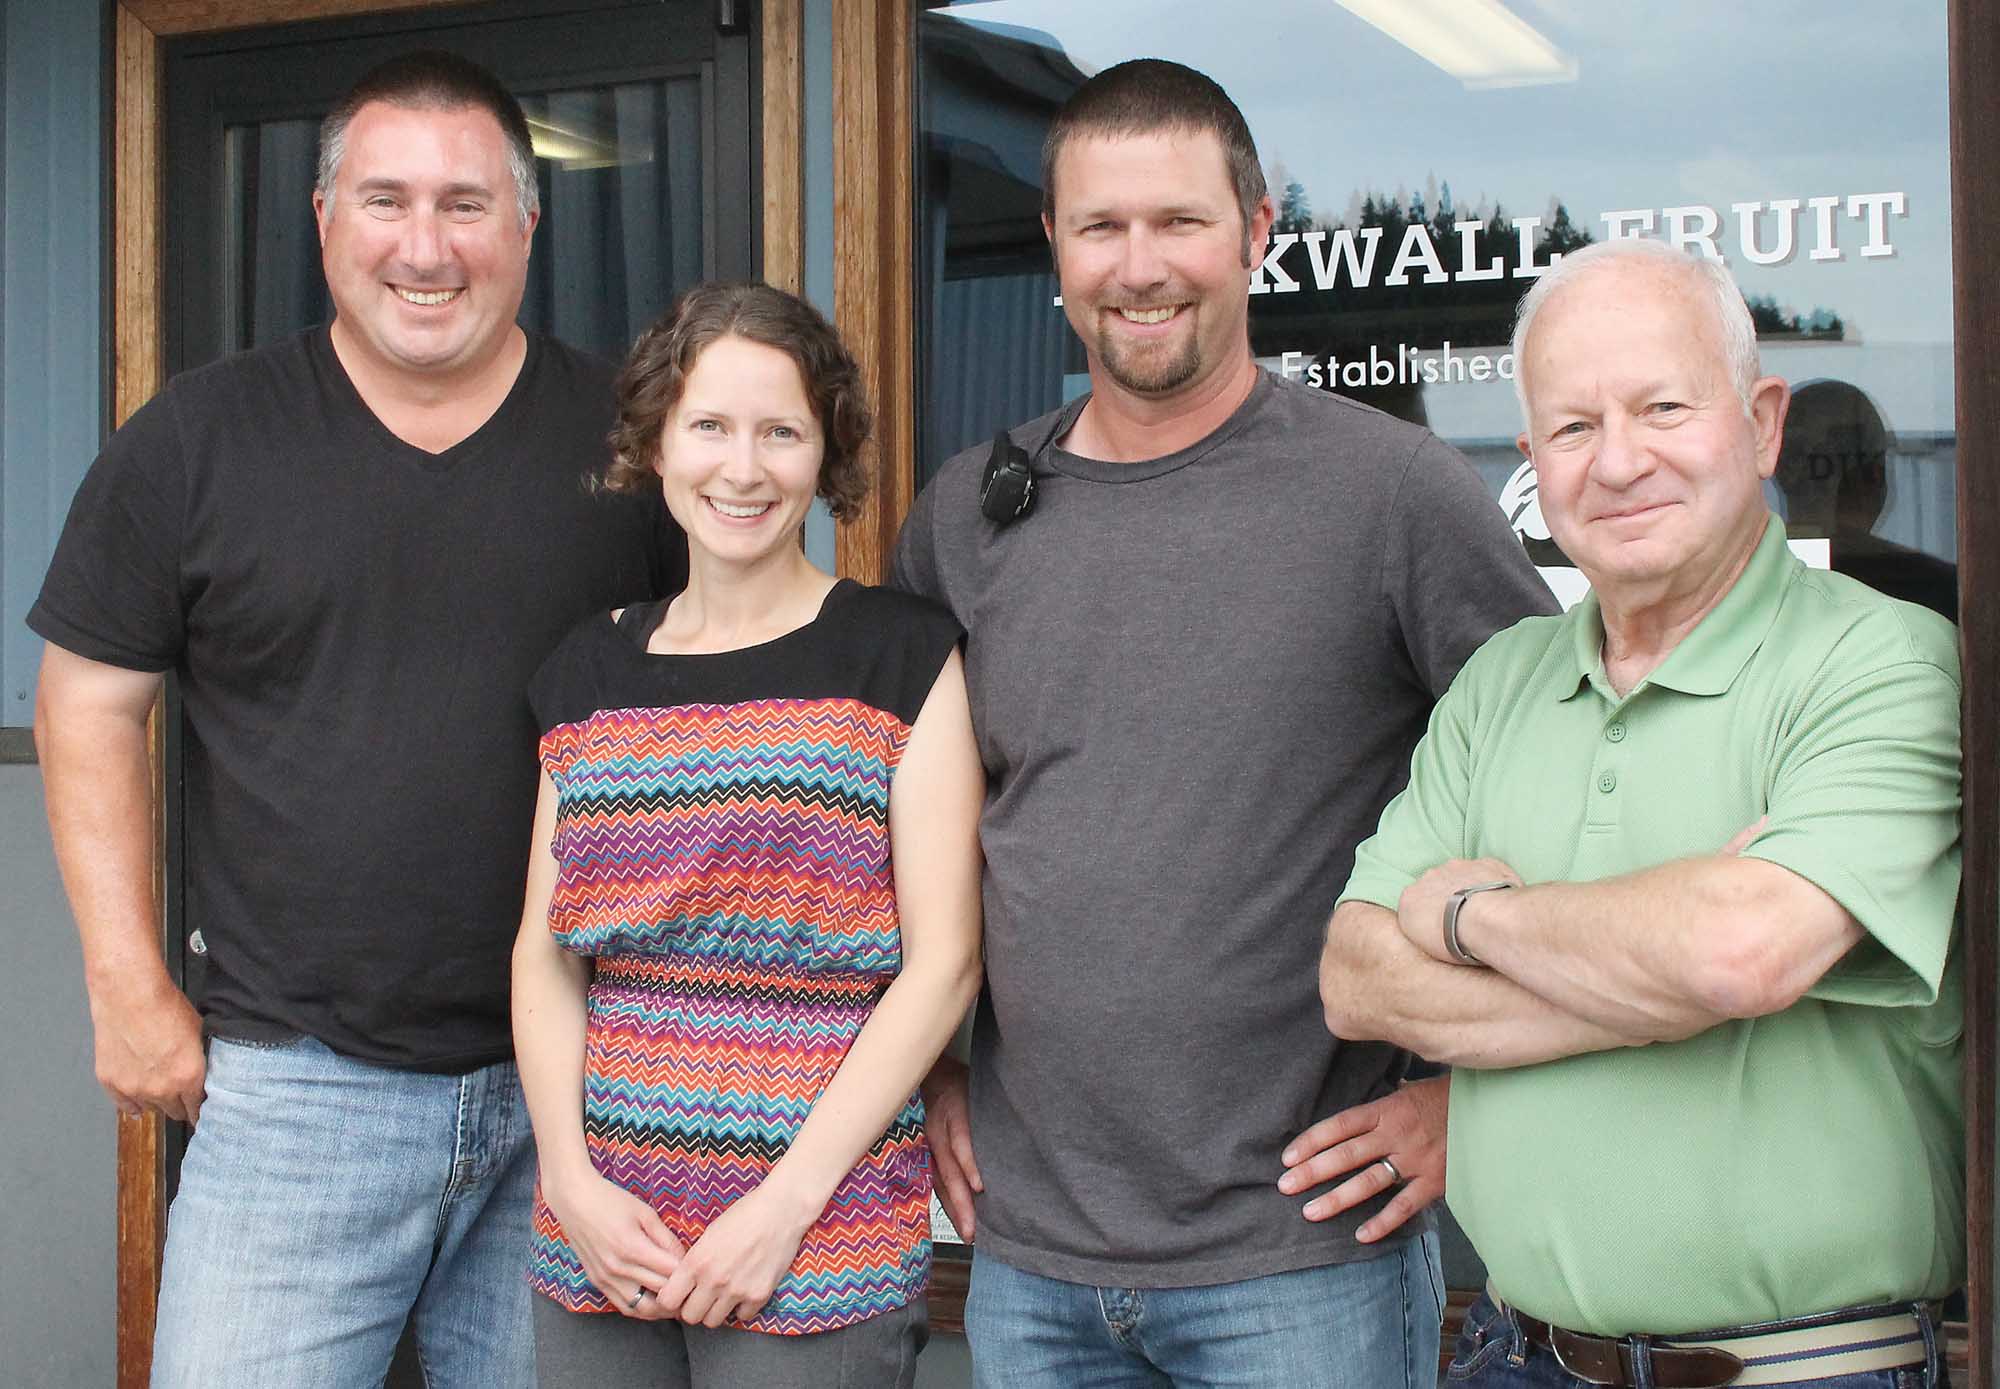 From right, Fred Duckwall with son Nathan Duckwall, daughter Sara Duckwall Snyder, and great-nephew Ed Weathers. (Geraldine Warner/Good Fruit Grower)